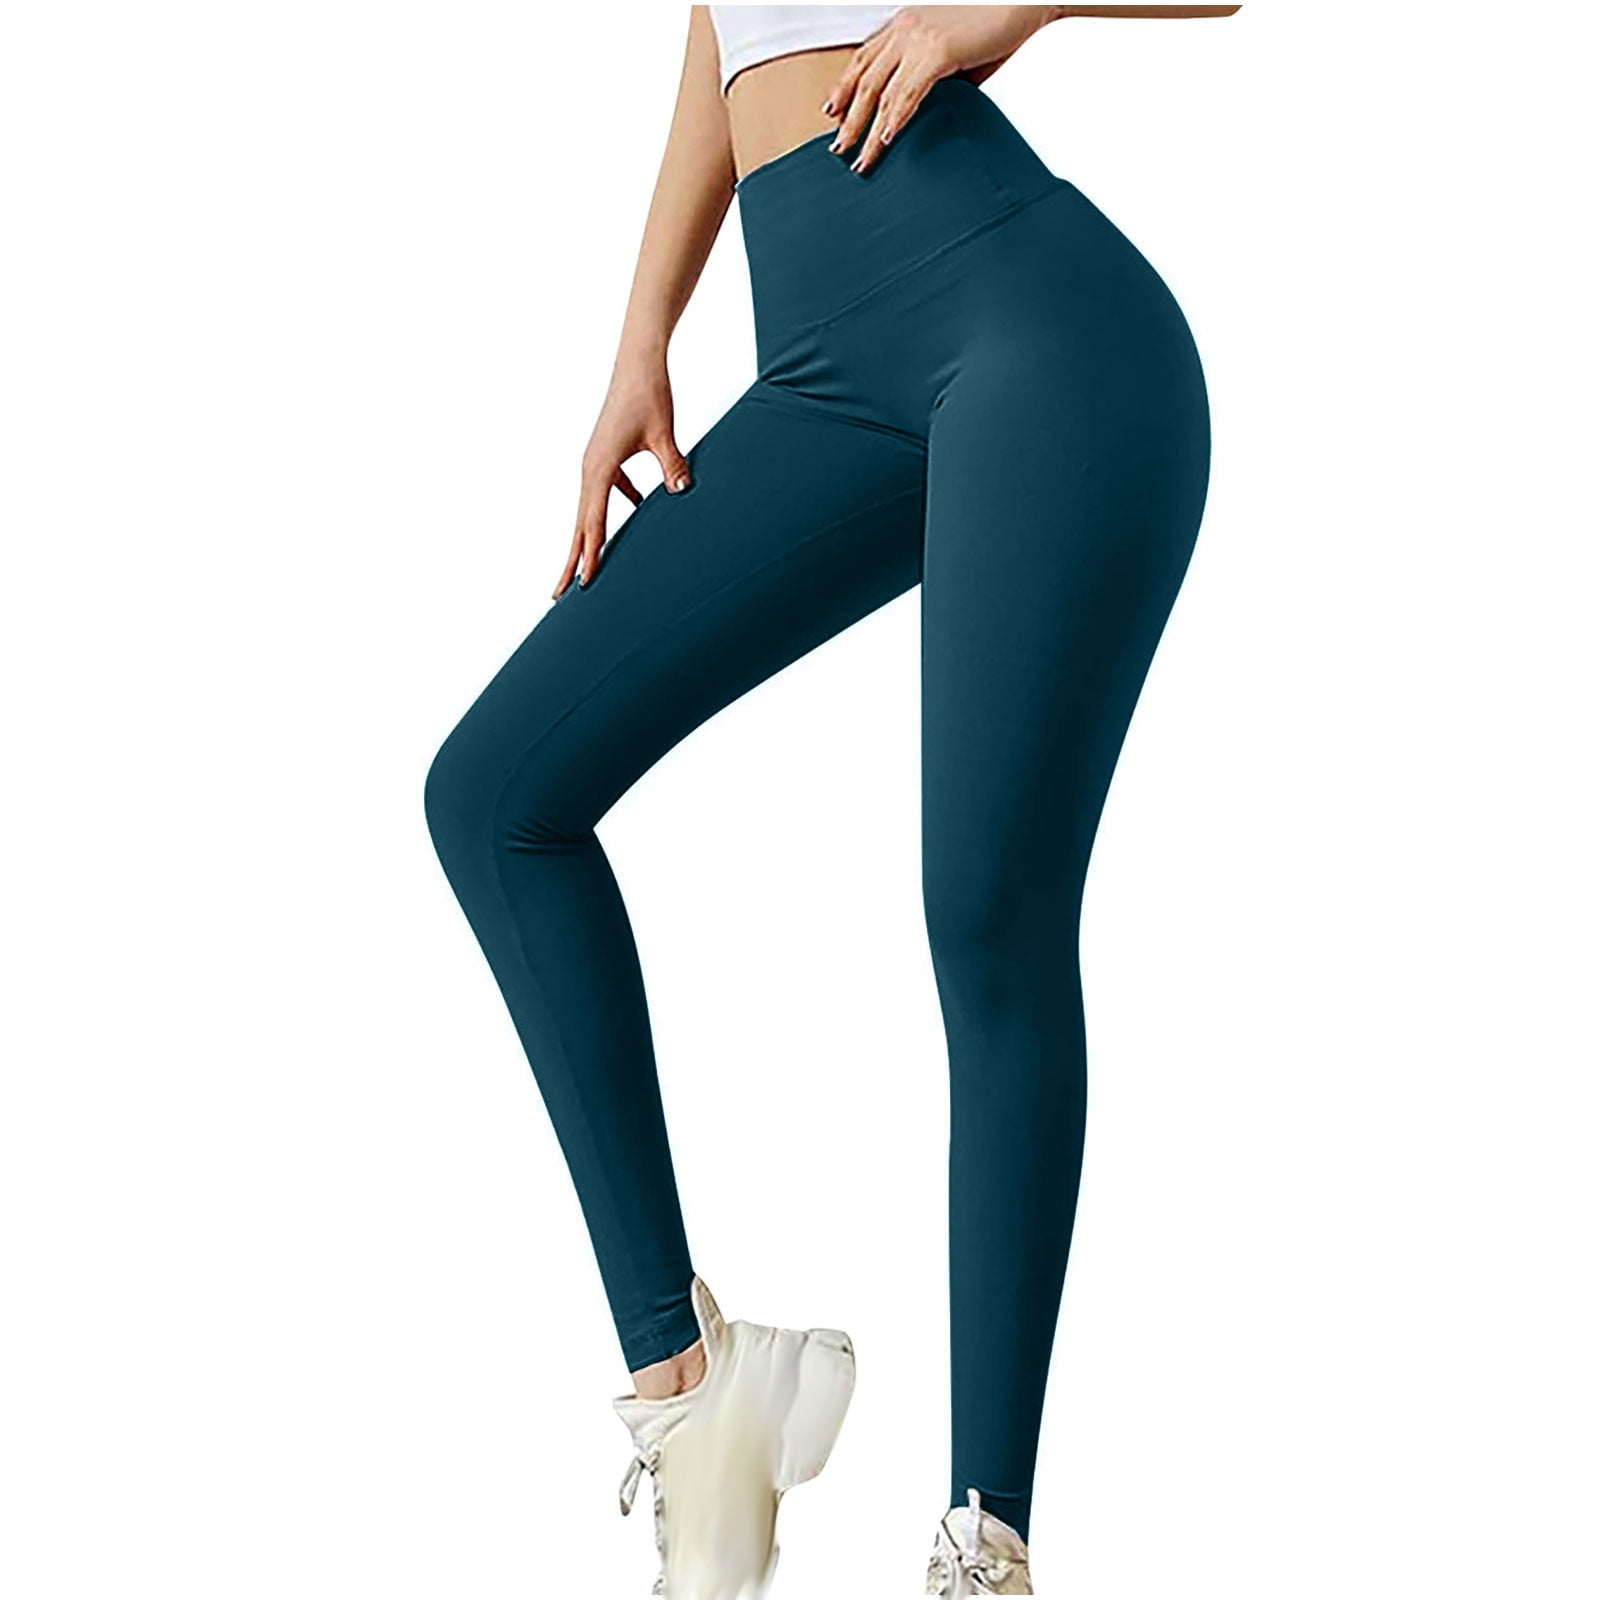 Leggings for Women Soft Tummy Control Slimming Yoga Pants for Workout  Running Women Fashion And Comfortable Solid Color Back Bow Slimming Yoga  Pants